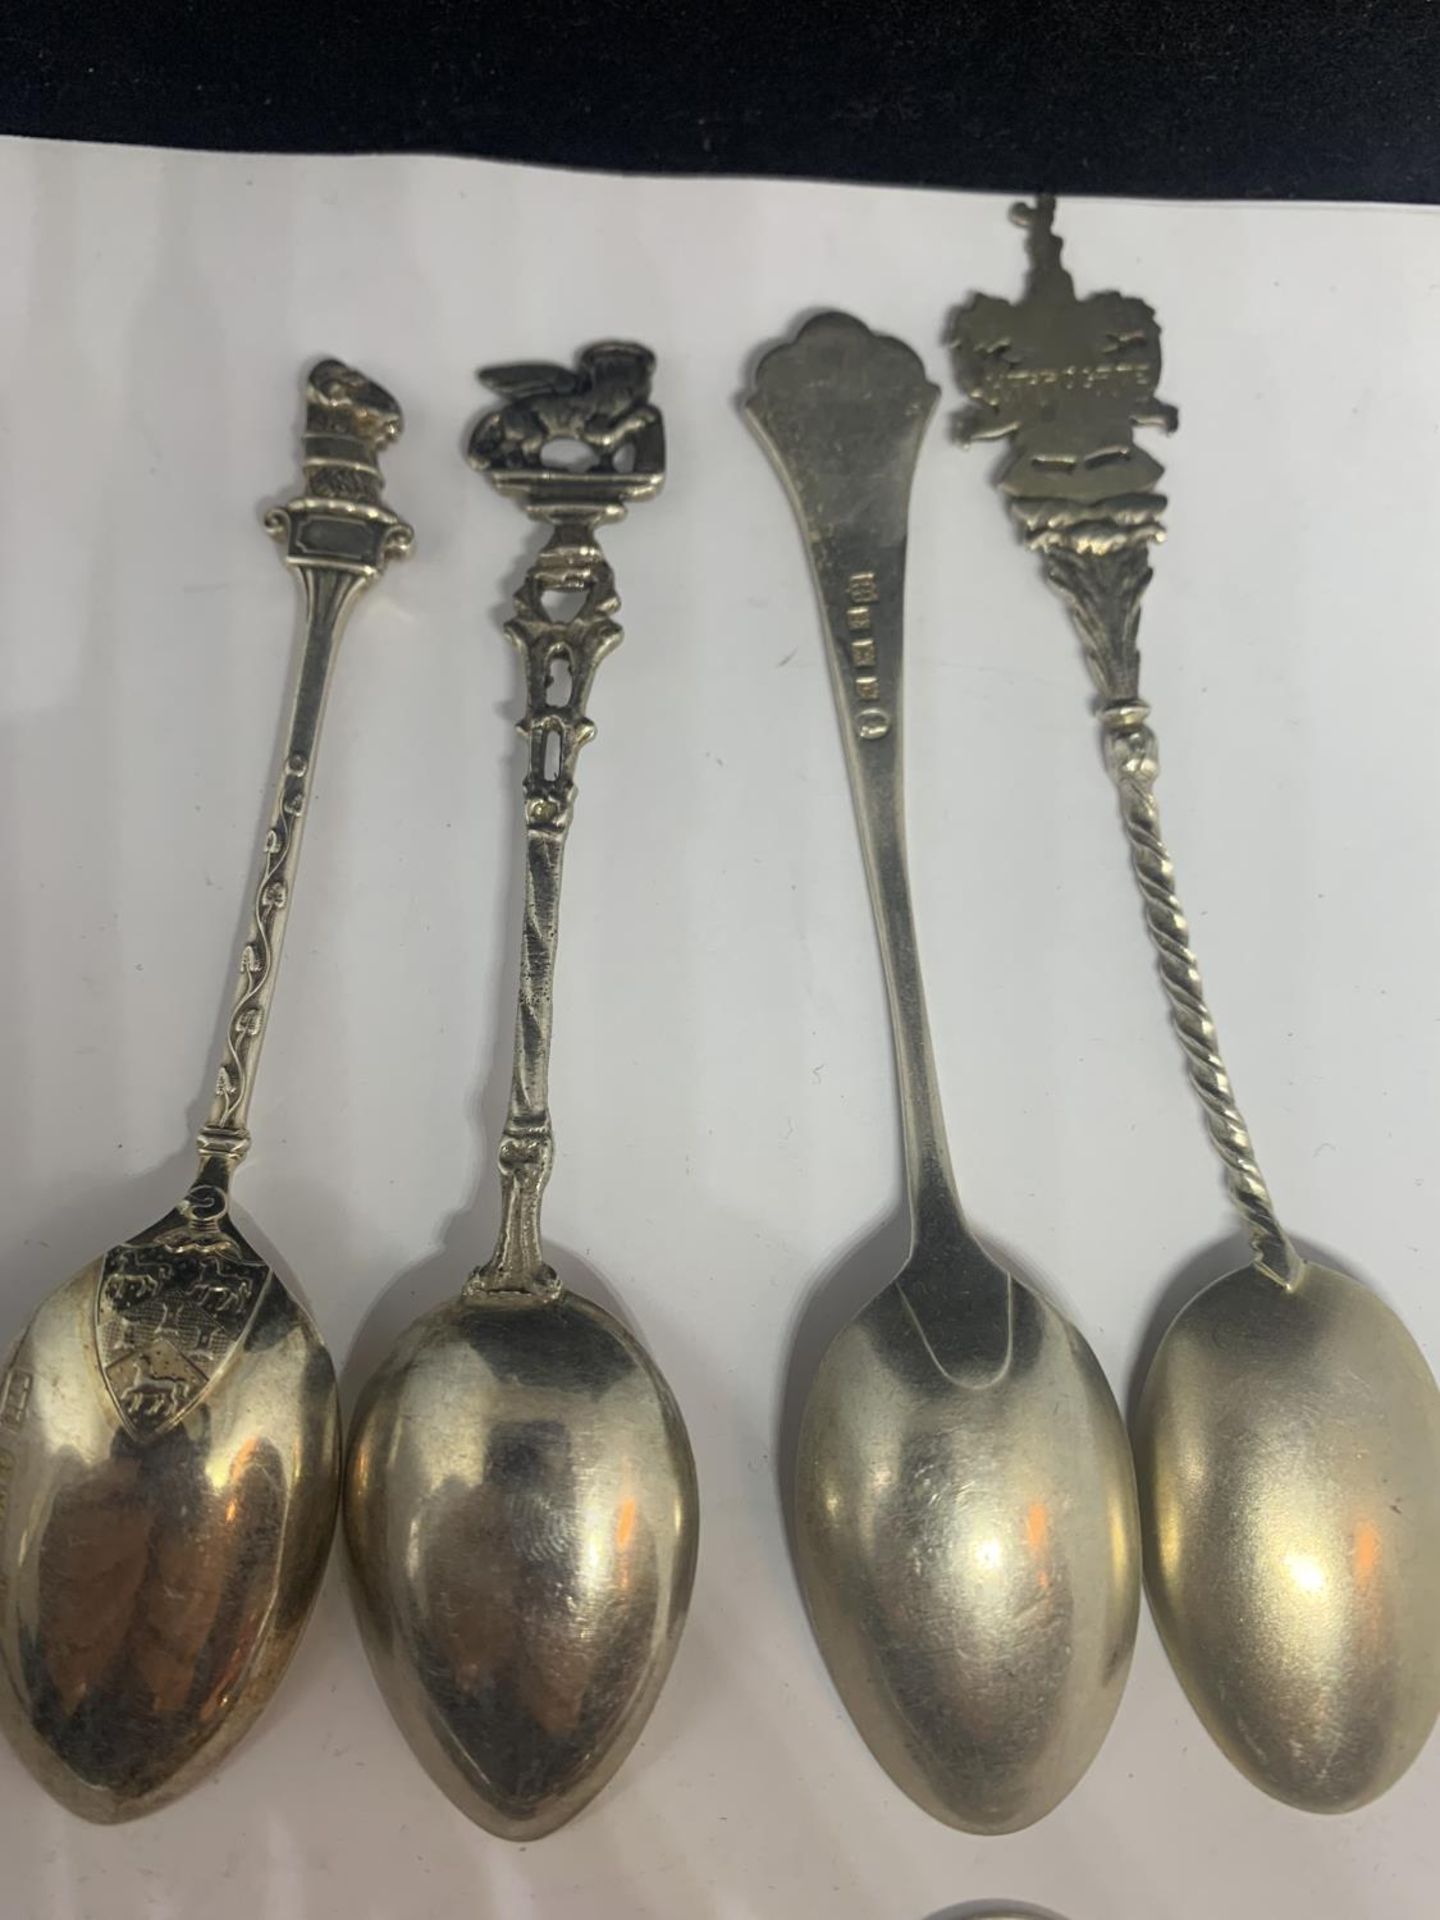 EIGHT MARKED SILVER COLLECTORS SPOONS GROSS WEIGHT 103 GRAMS - Image 10 of 10